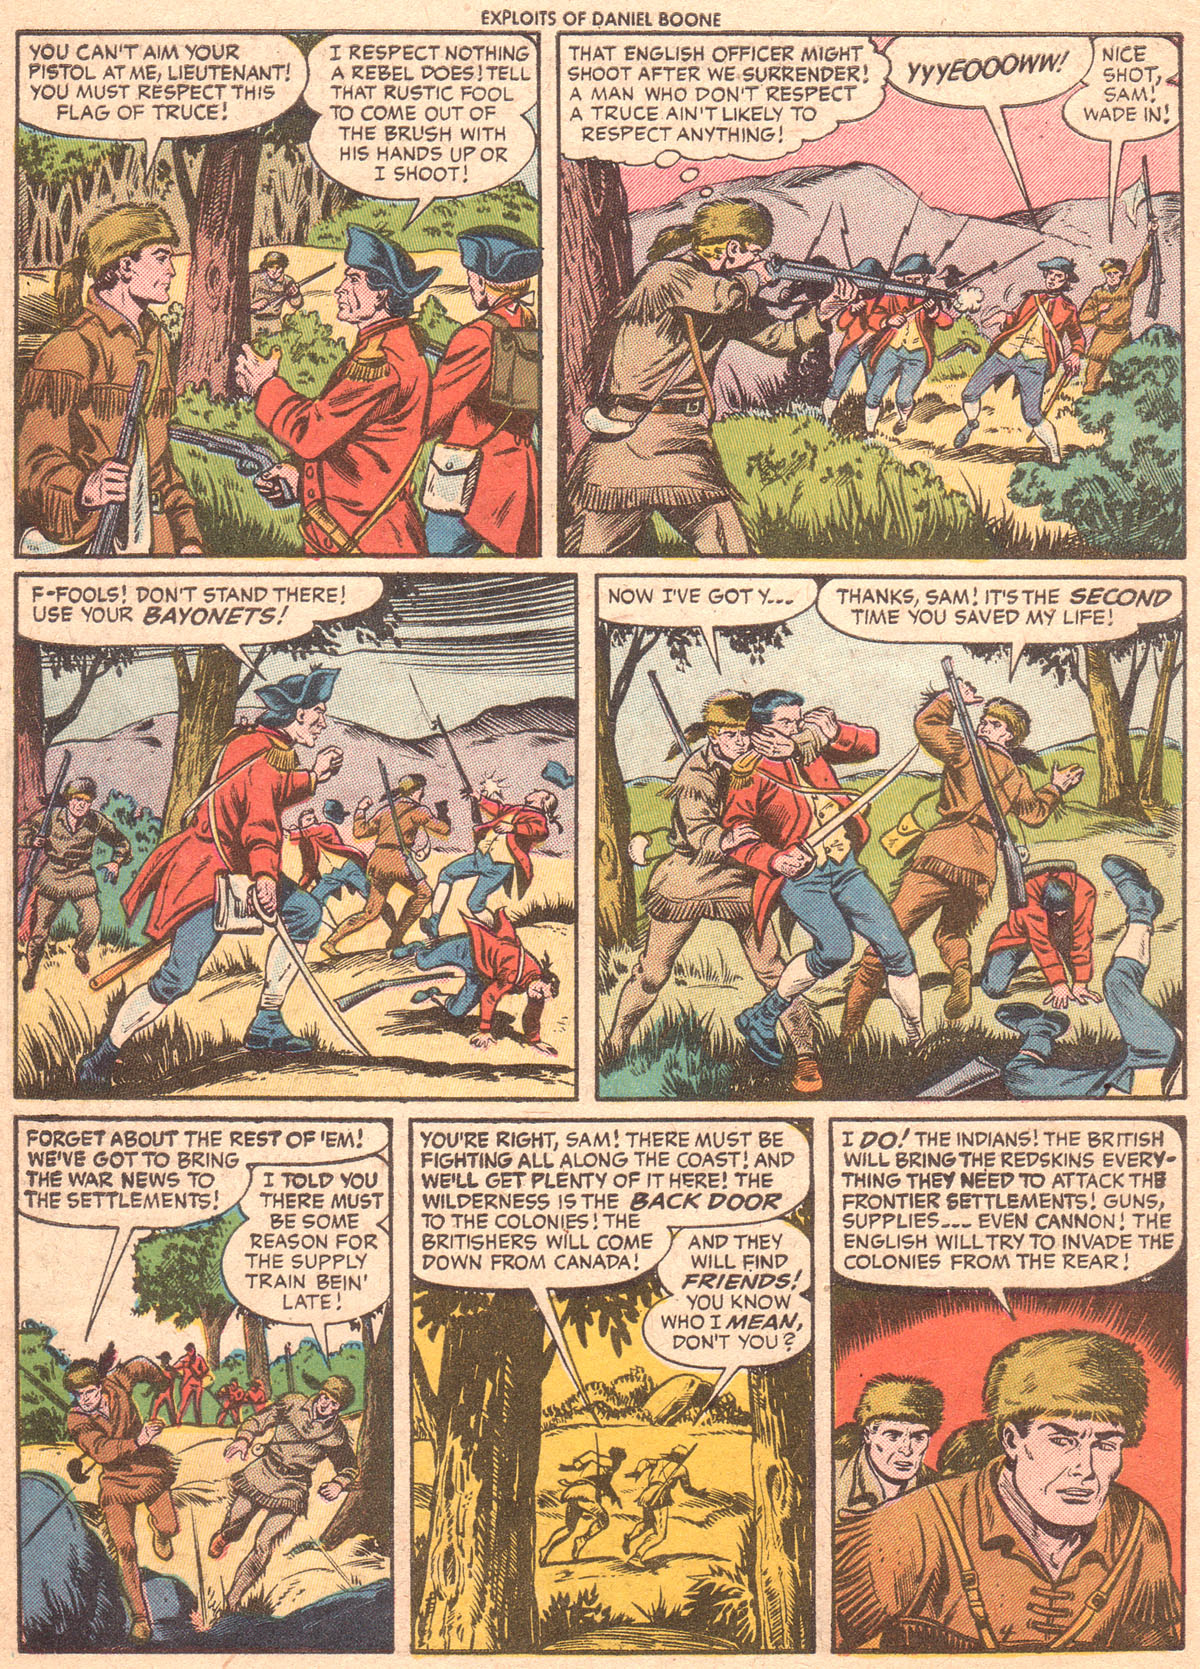 Read online Exploits of Daniel Boone comic -  Issue #5 - 6